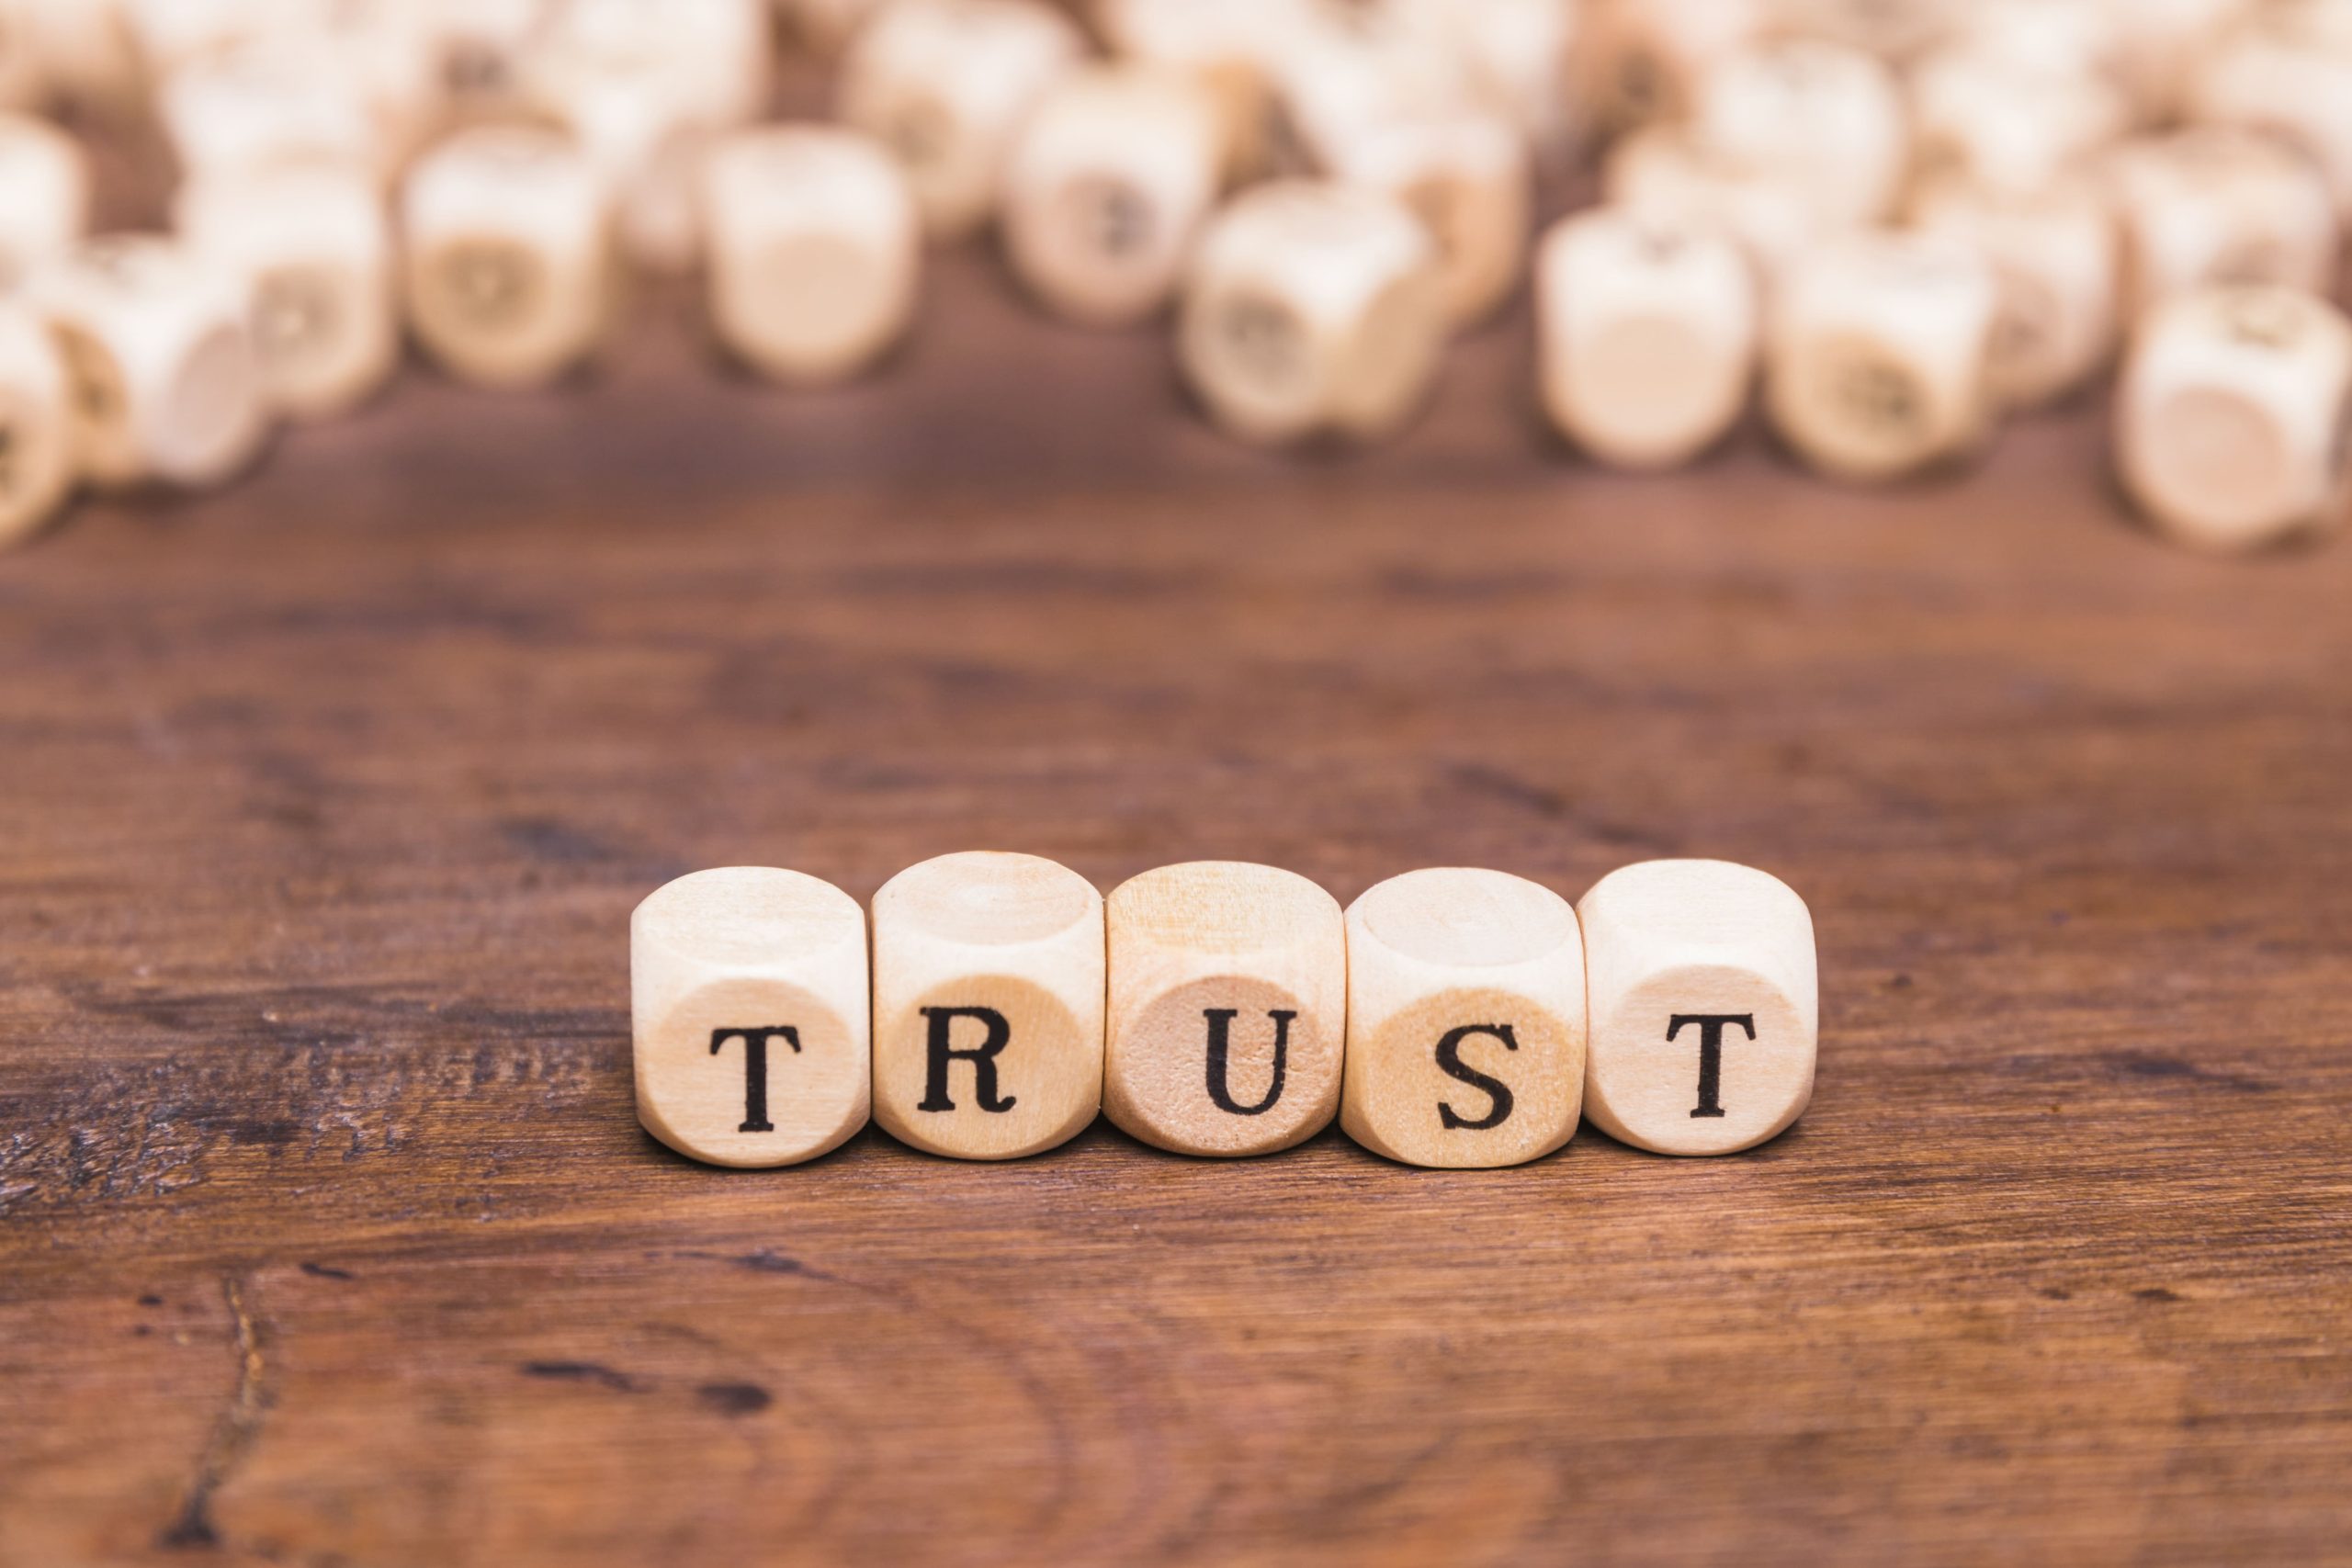 trust-word-made-with-wooden-blocks-1-scaled.jpg